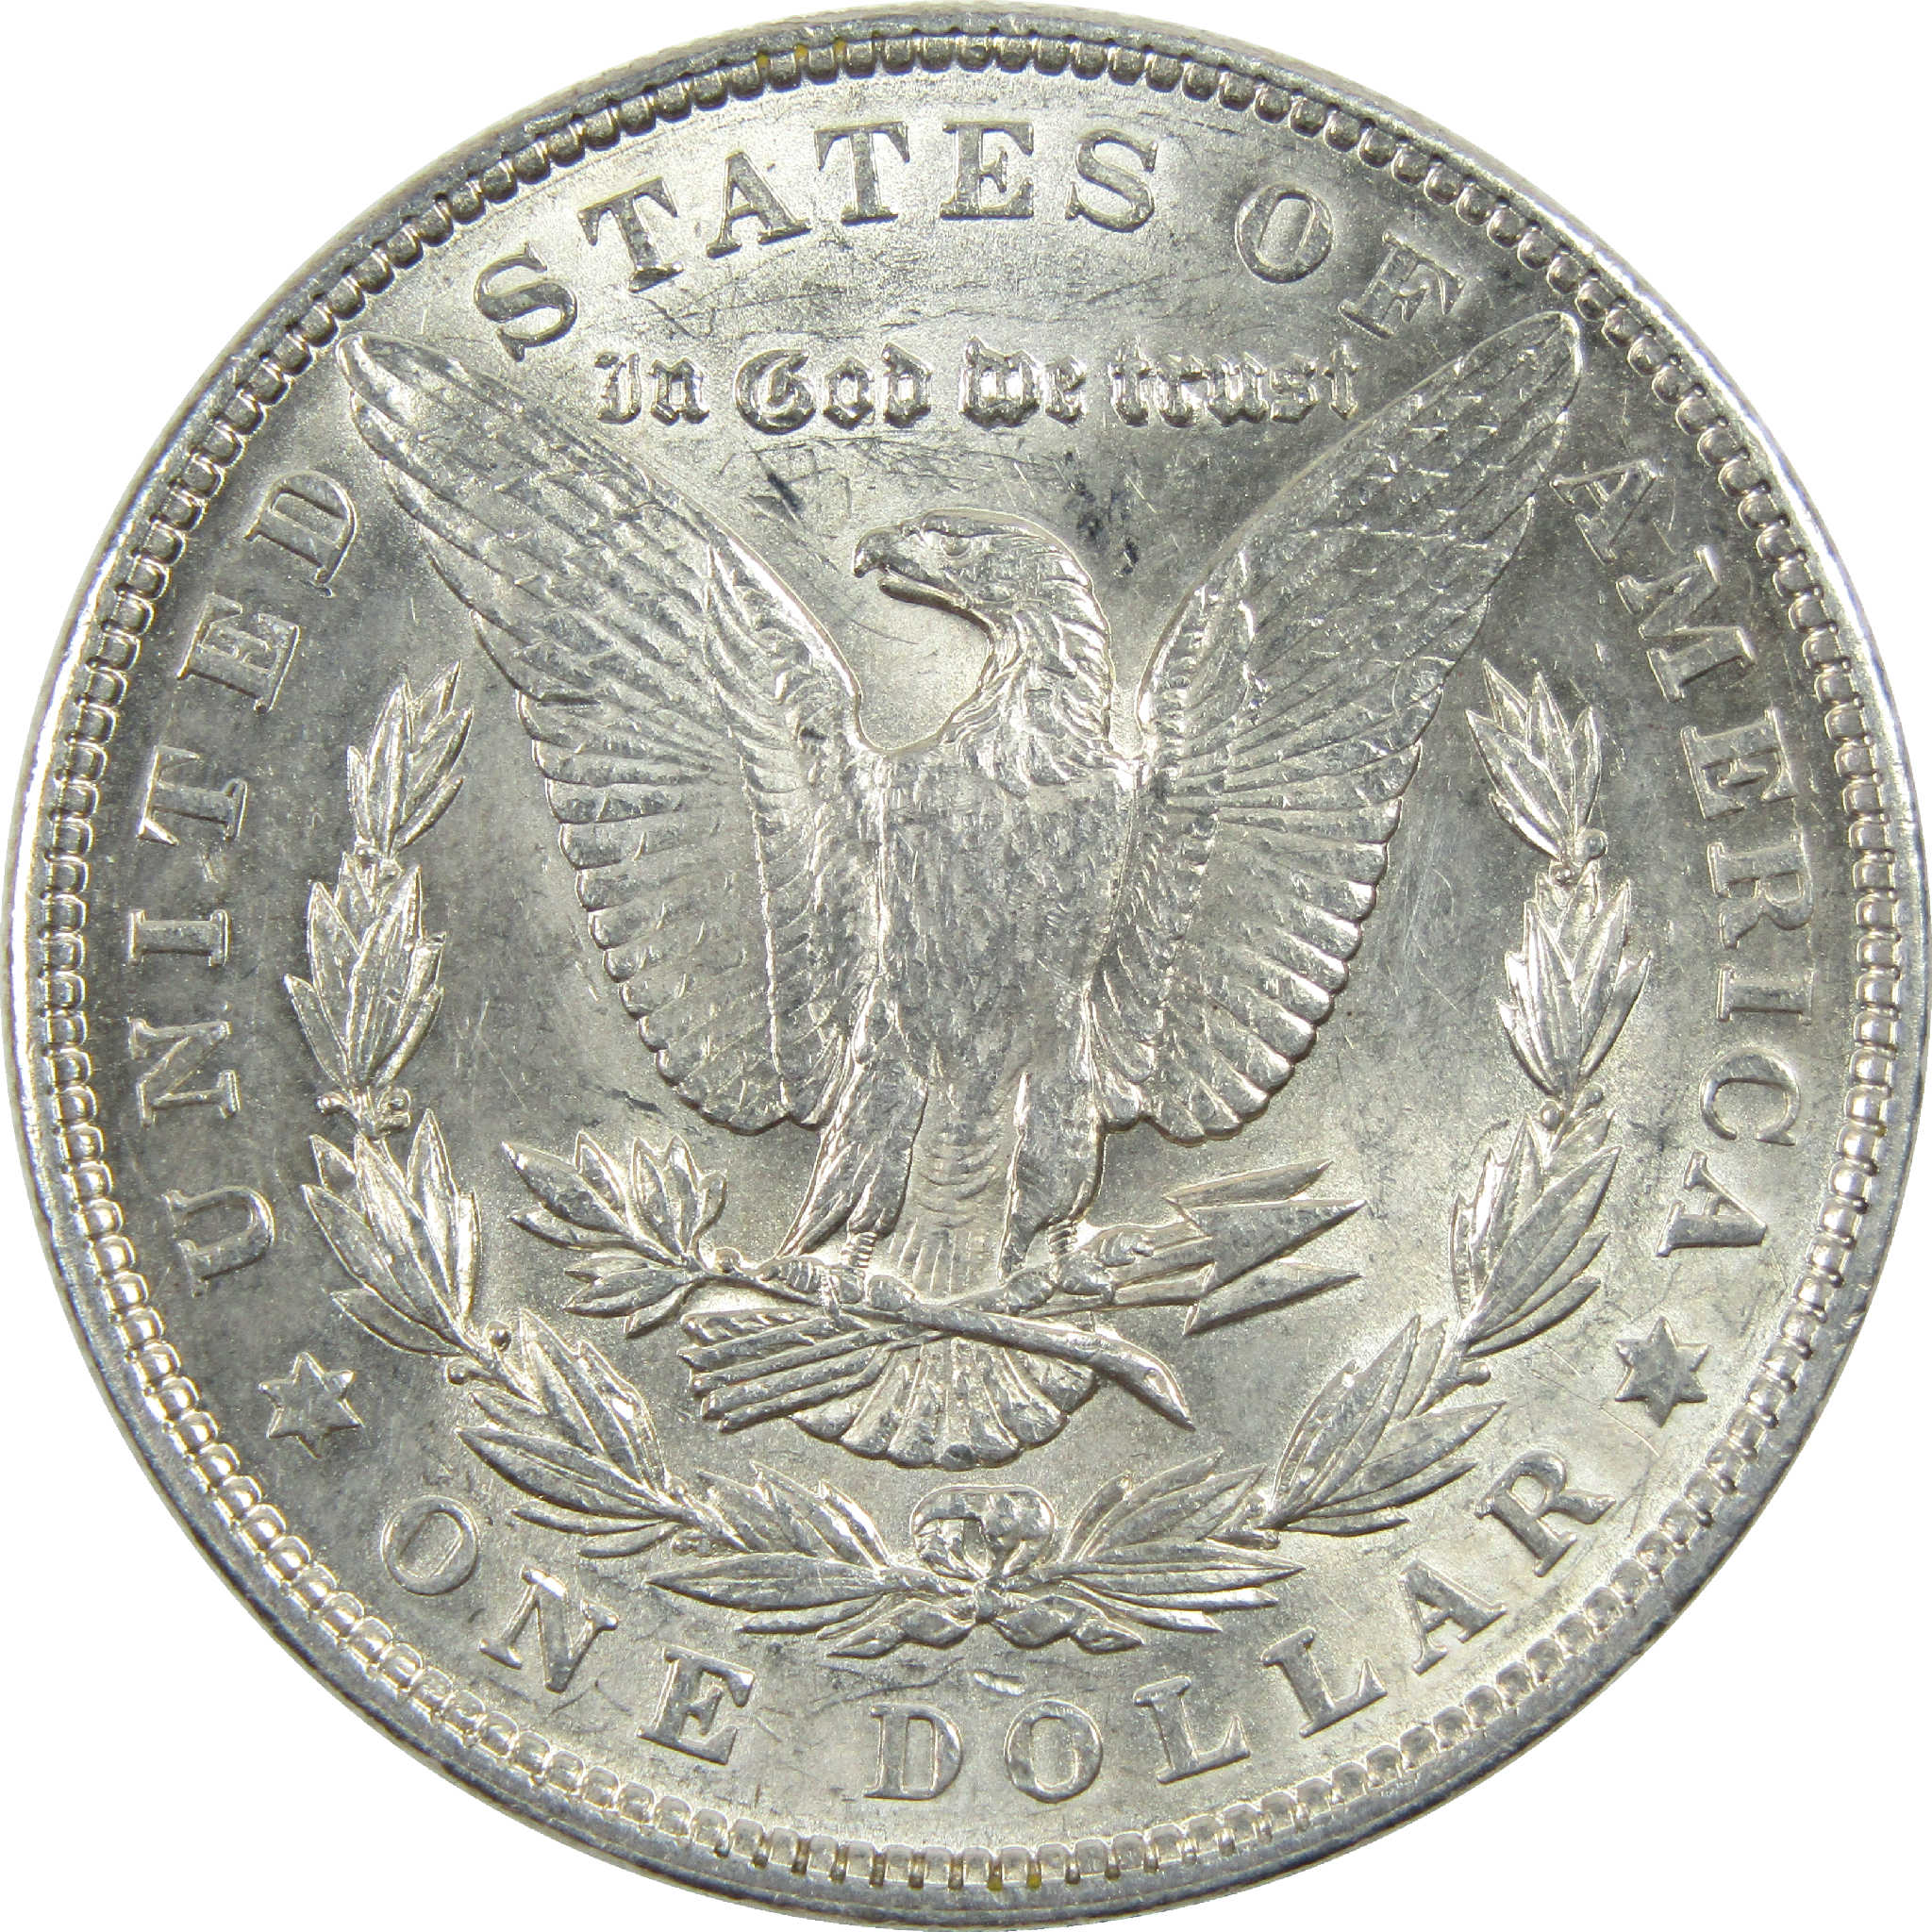 1902 Morgan Dollar AU About Uncirculated Silver $1 Coin SKU:I11819 - Morgan coin - Morgan silver dollar - Morgan silver dollar for sale - Profile Coins &amp; Collectibles